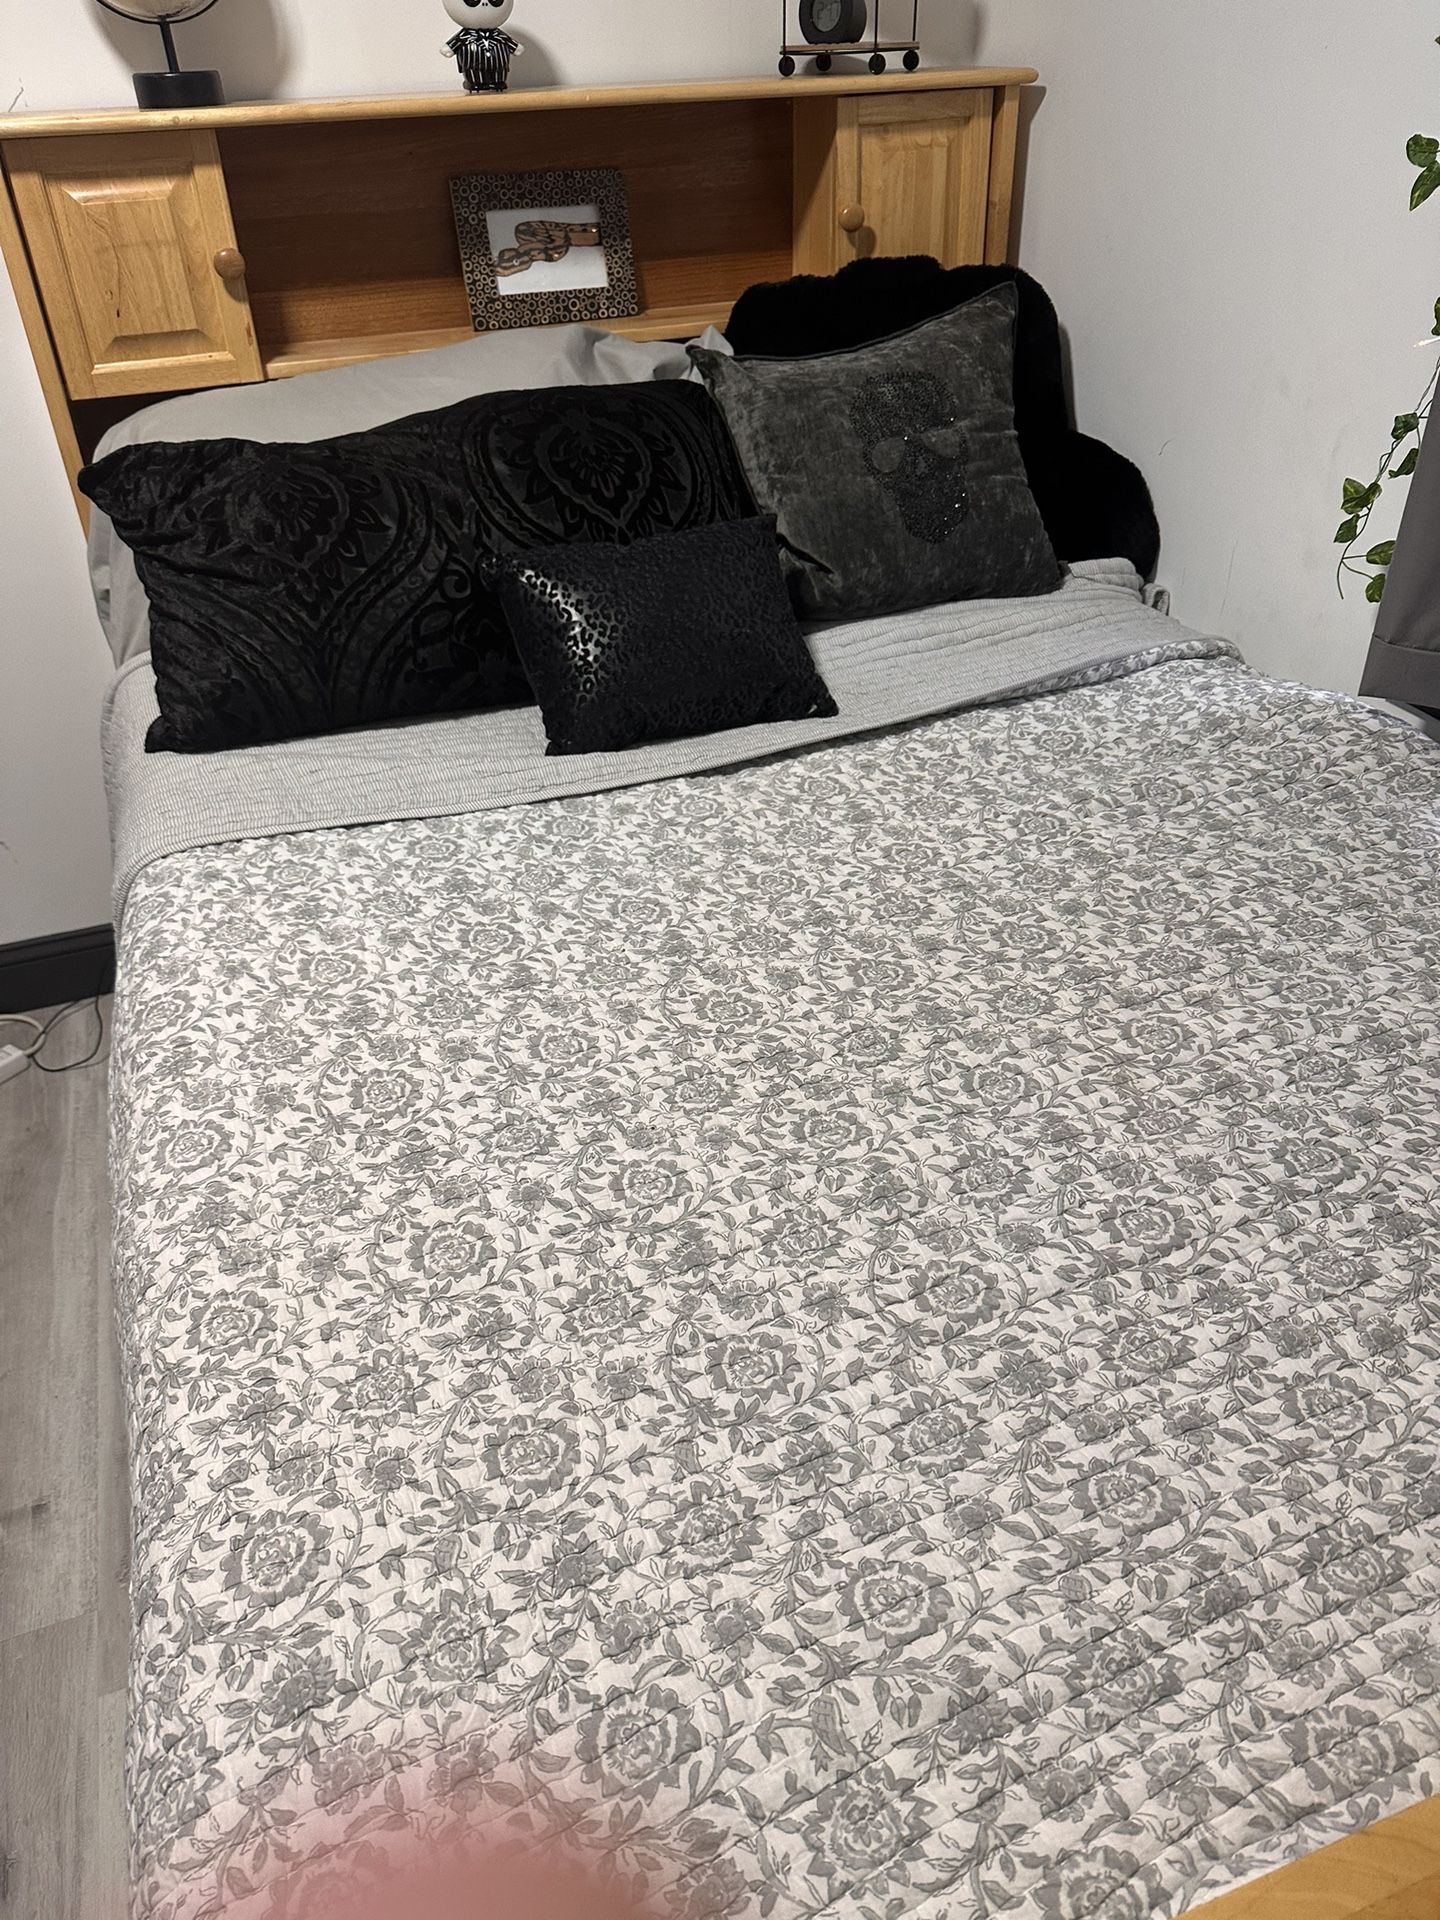 Queen Bed And Frame With Brand New Mattress And Mattress Cover 